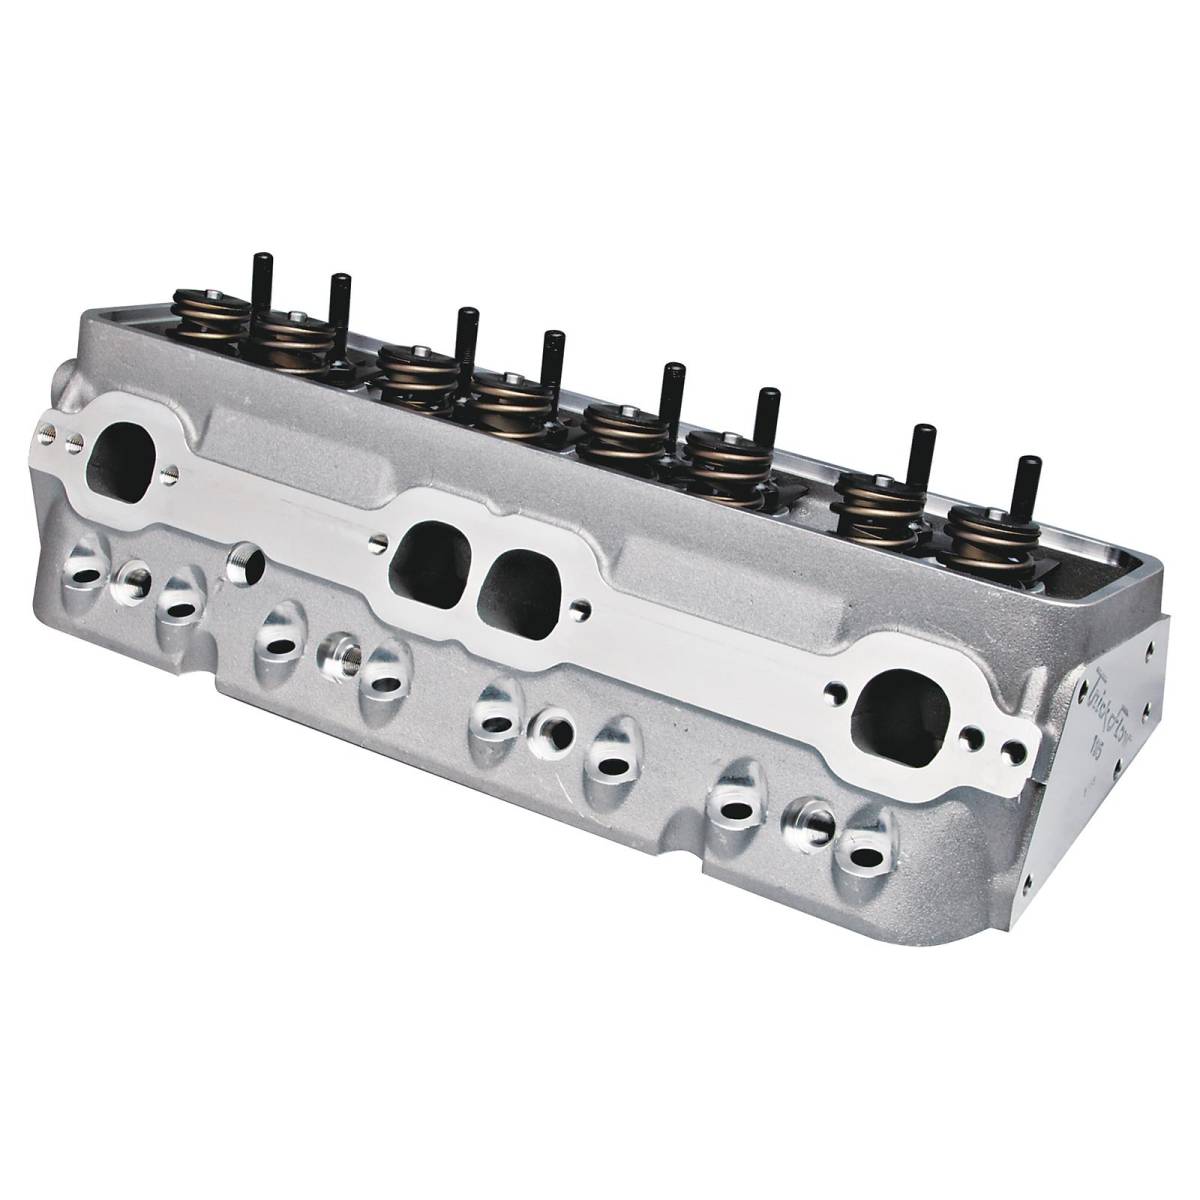 Trickflow - Trickflow Super 23 Cylinder Heads SBC 195cc Intake, 62cc Chambers, 1.250" Springs, Perimeter Bolt - Image 1